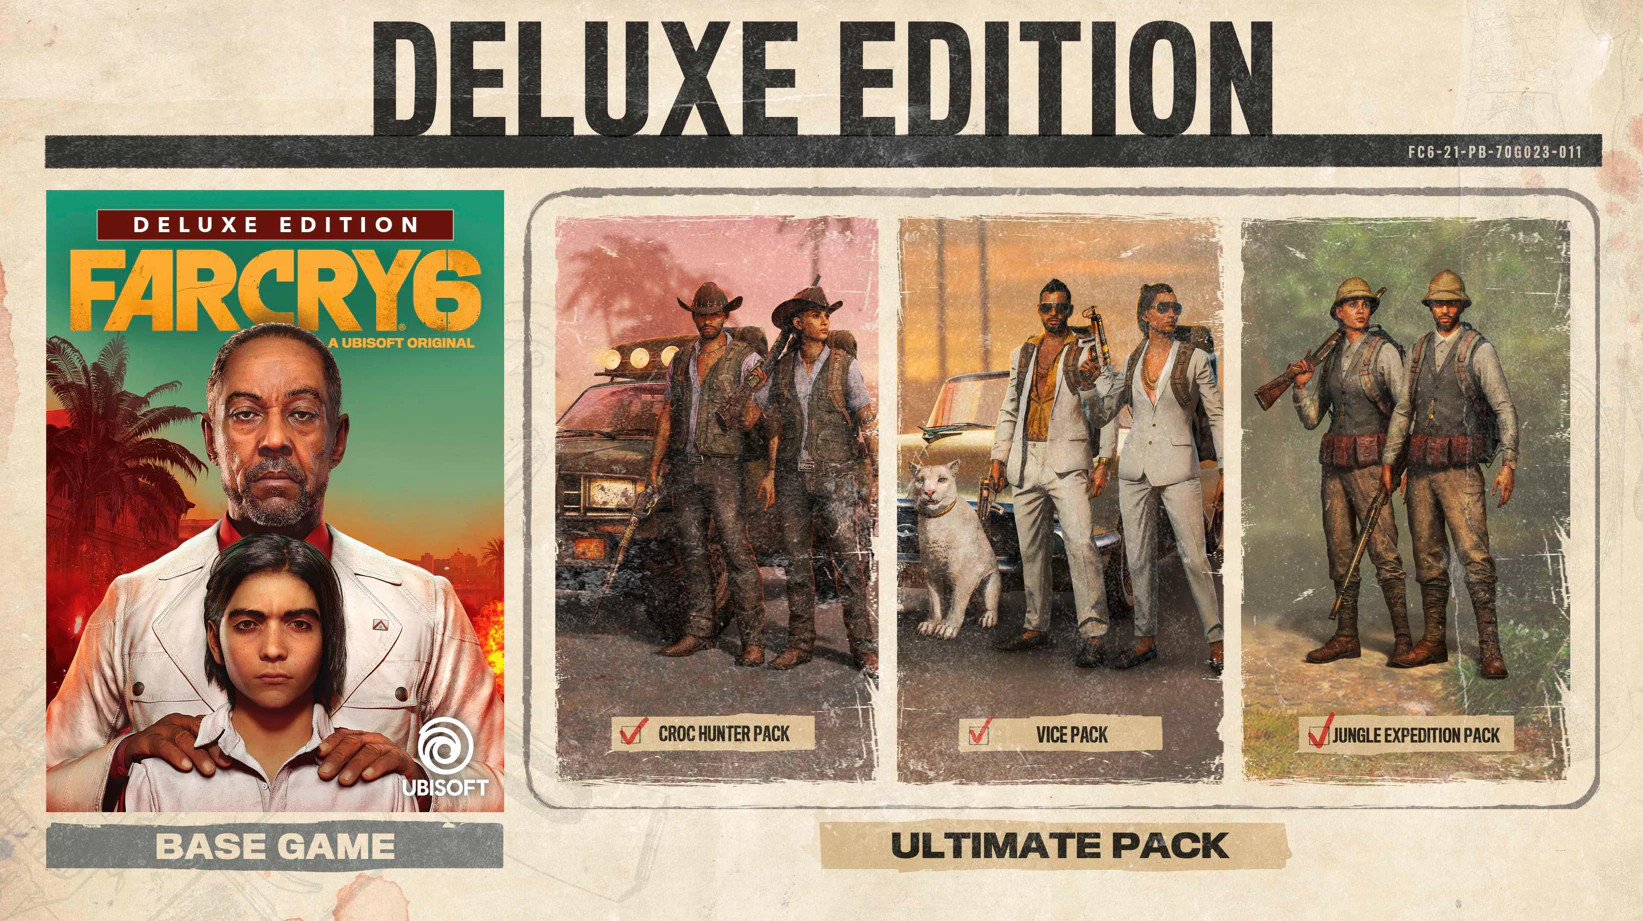 Far Cry 6 Deluxe Edition XBOX One / Xbox Series X|S CD Key 23.58 $